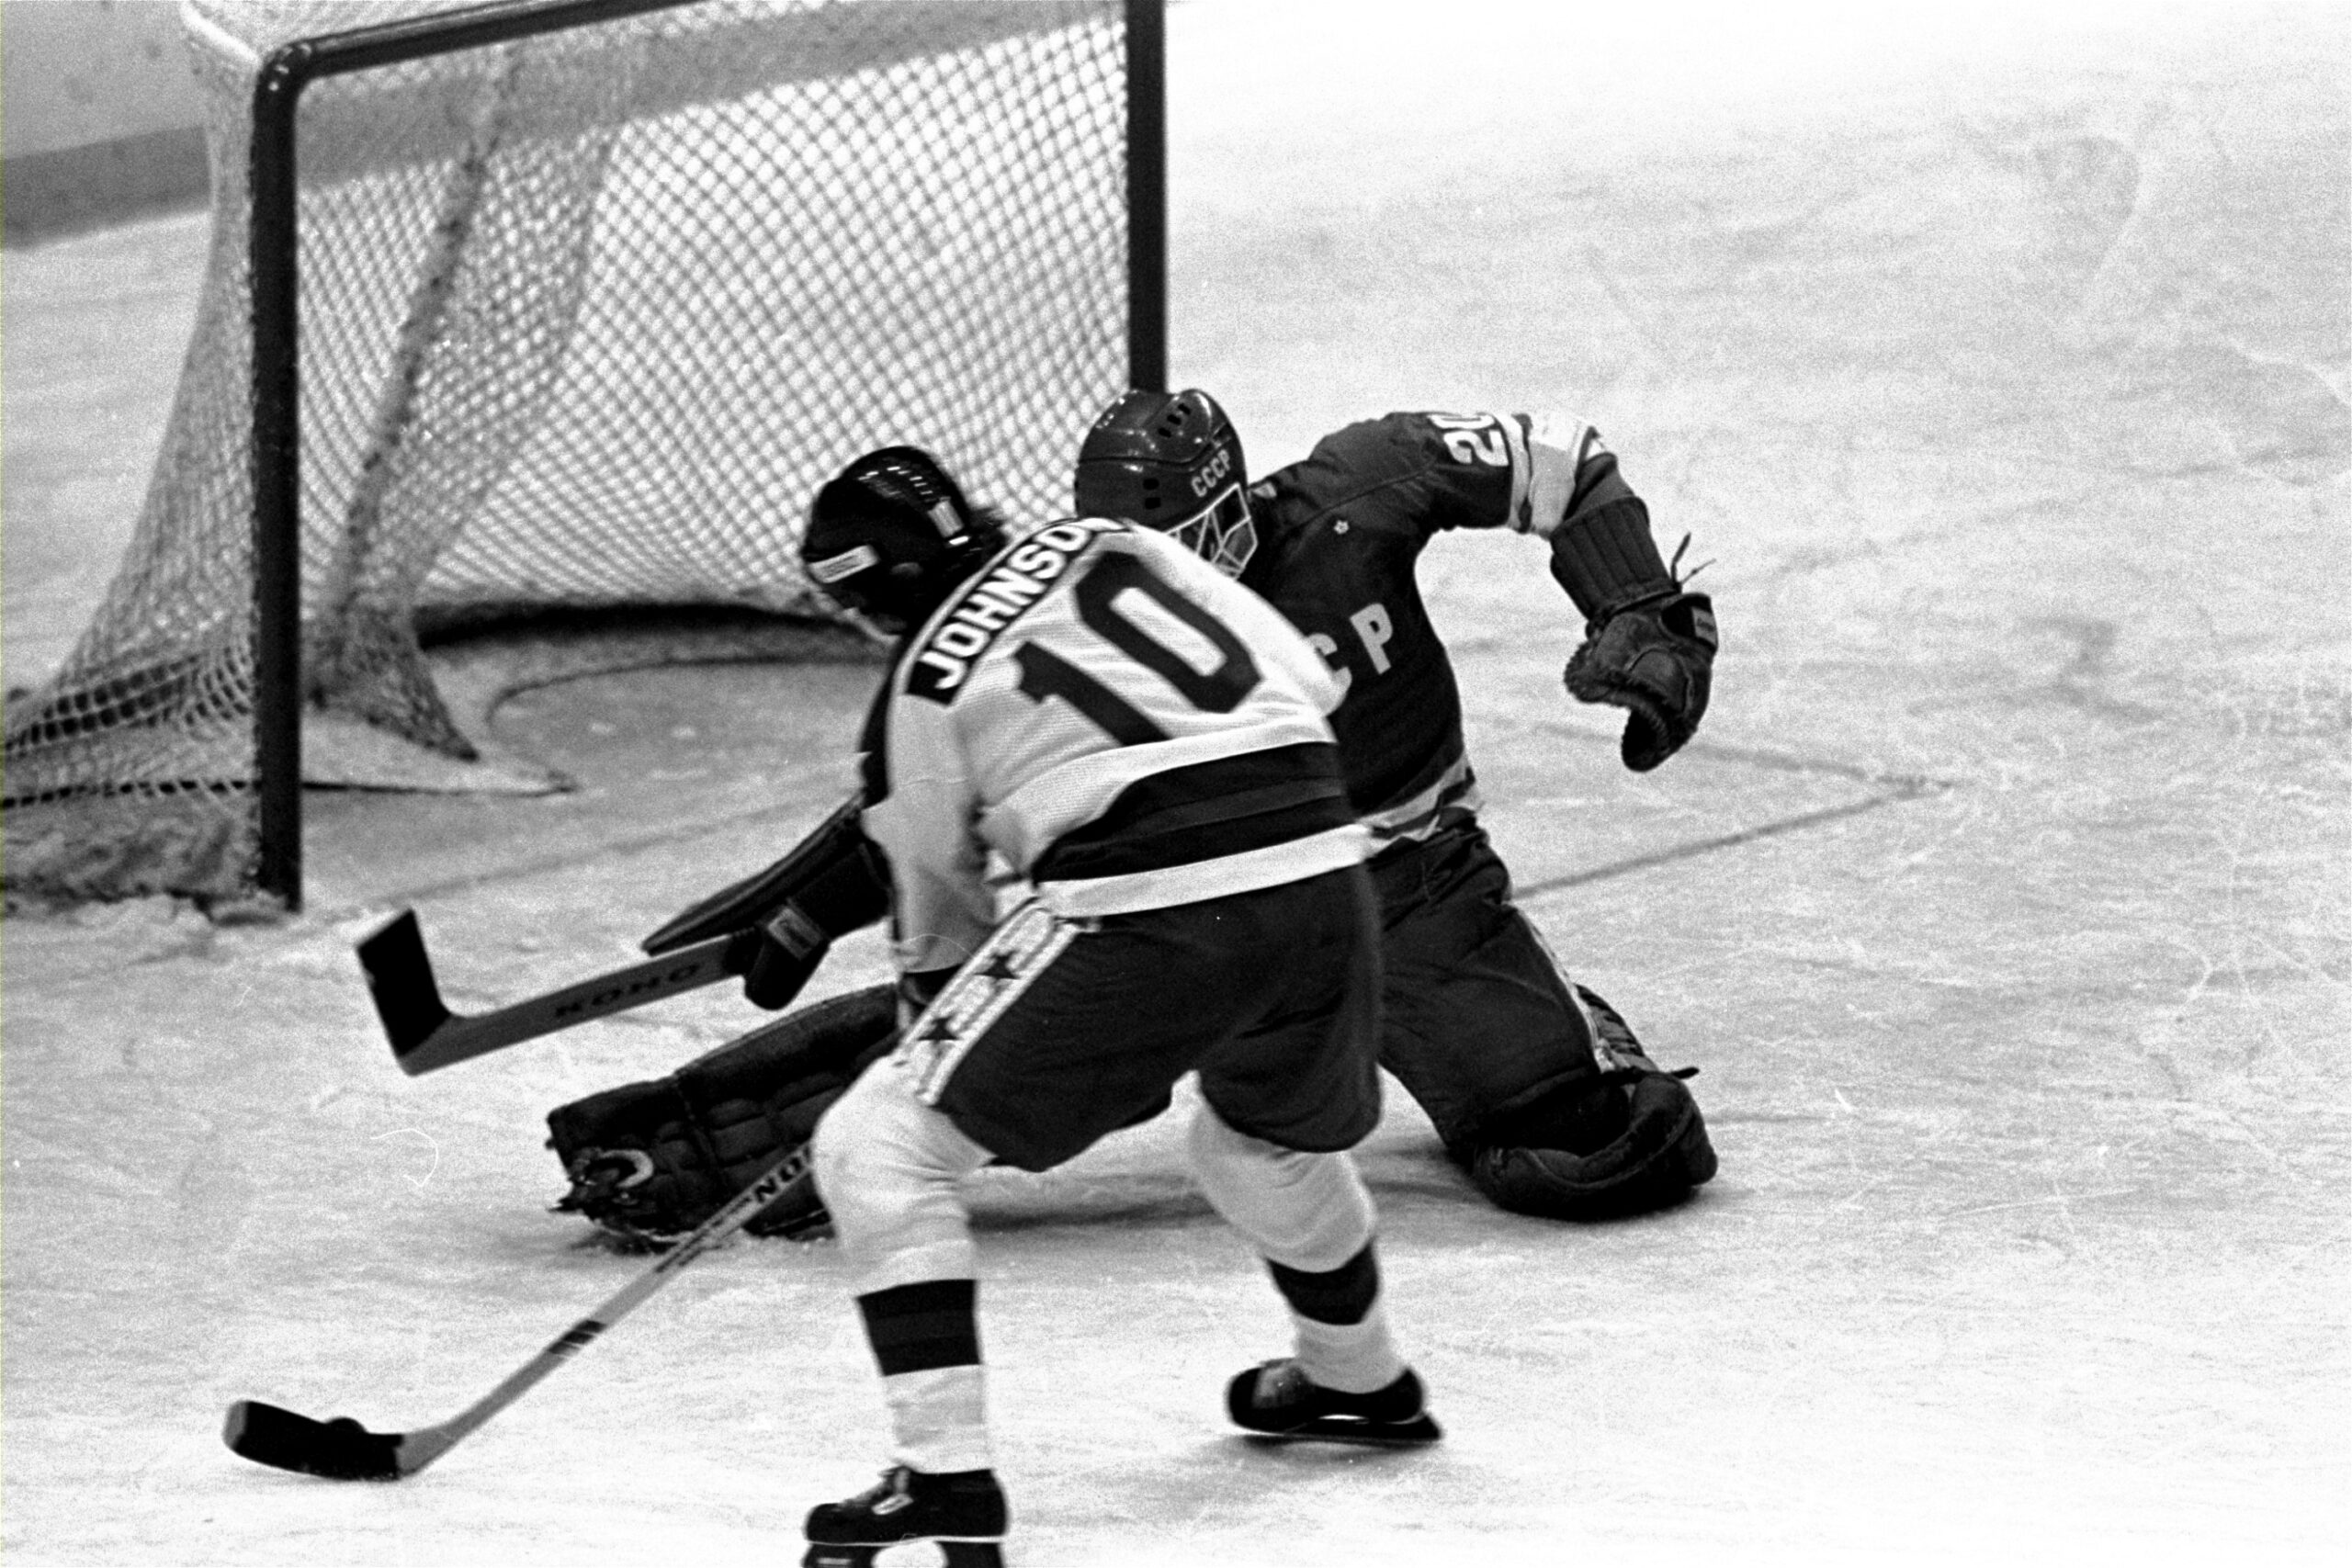 Mark Johnson scored two goals in the "Miracle on Ice"